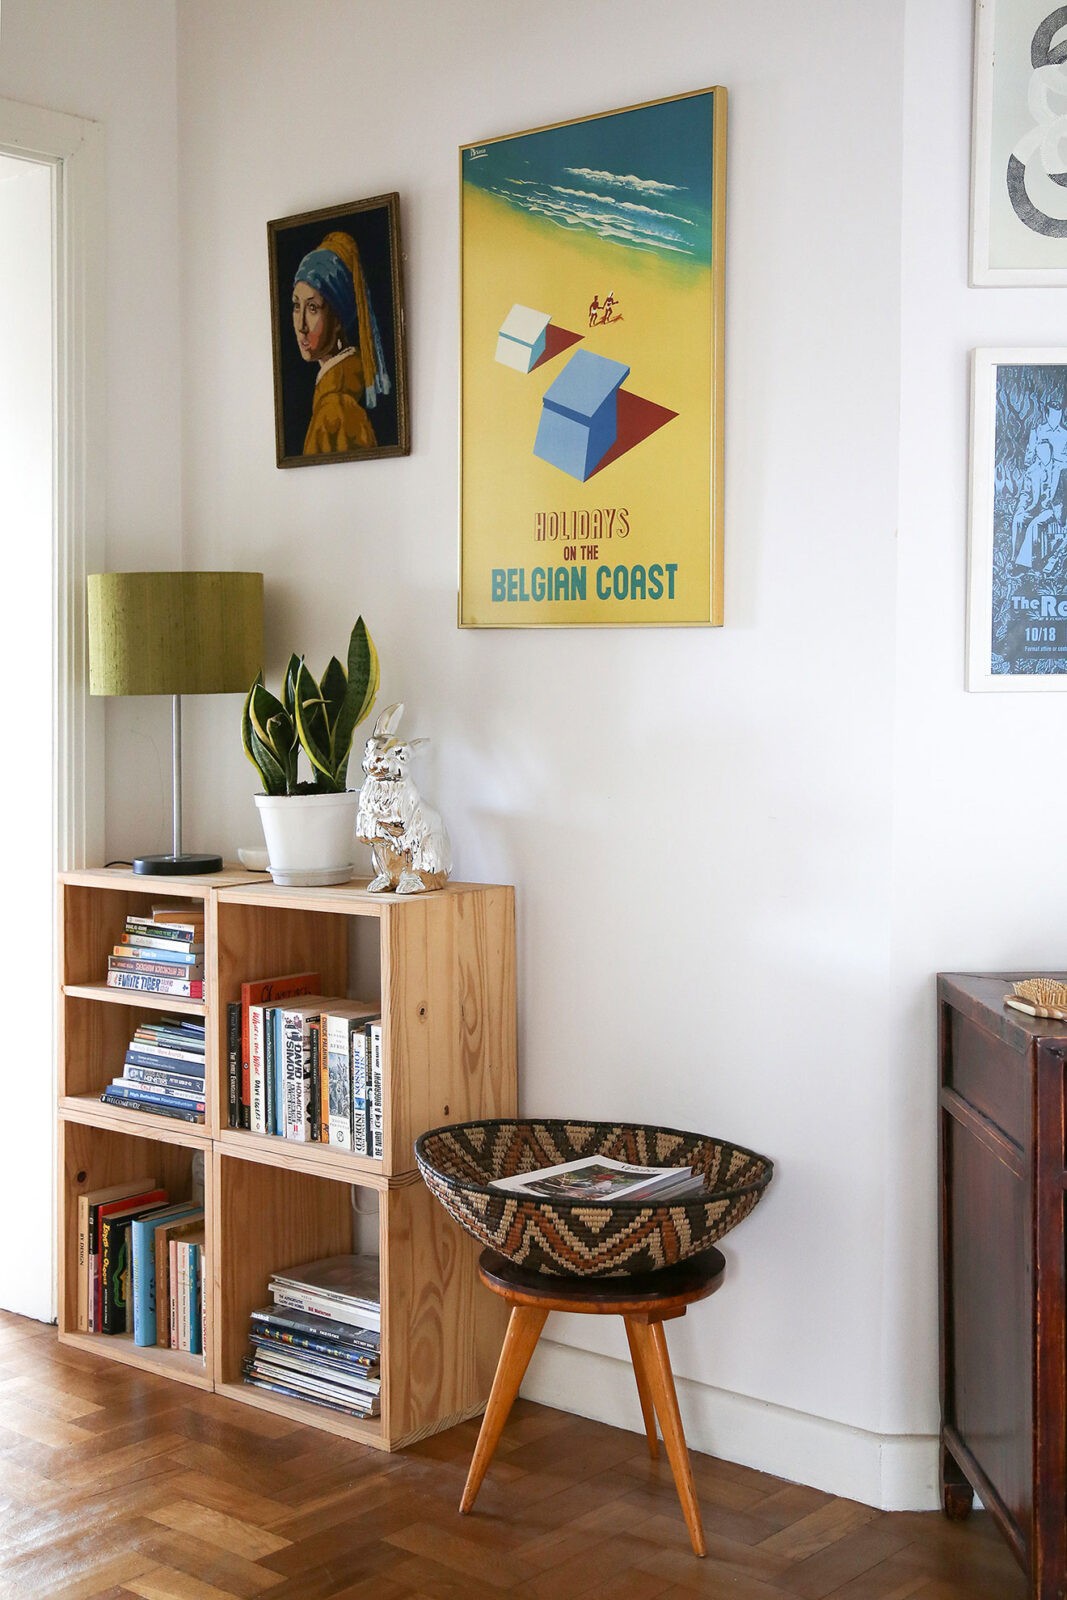 These Walls // Miss Moss shares bits of her apartment